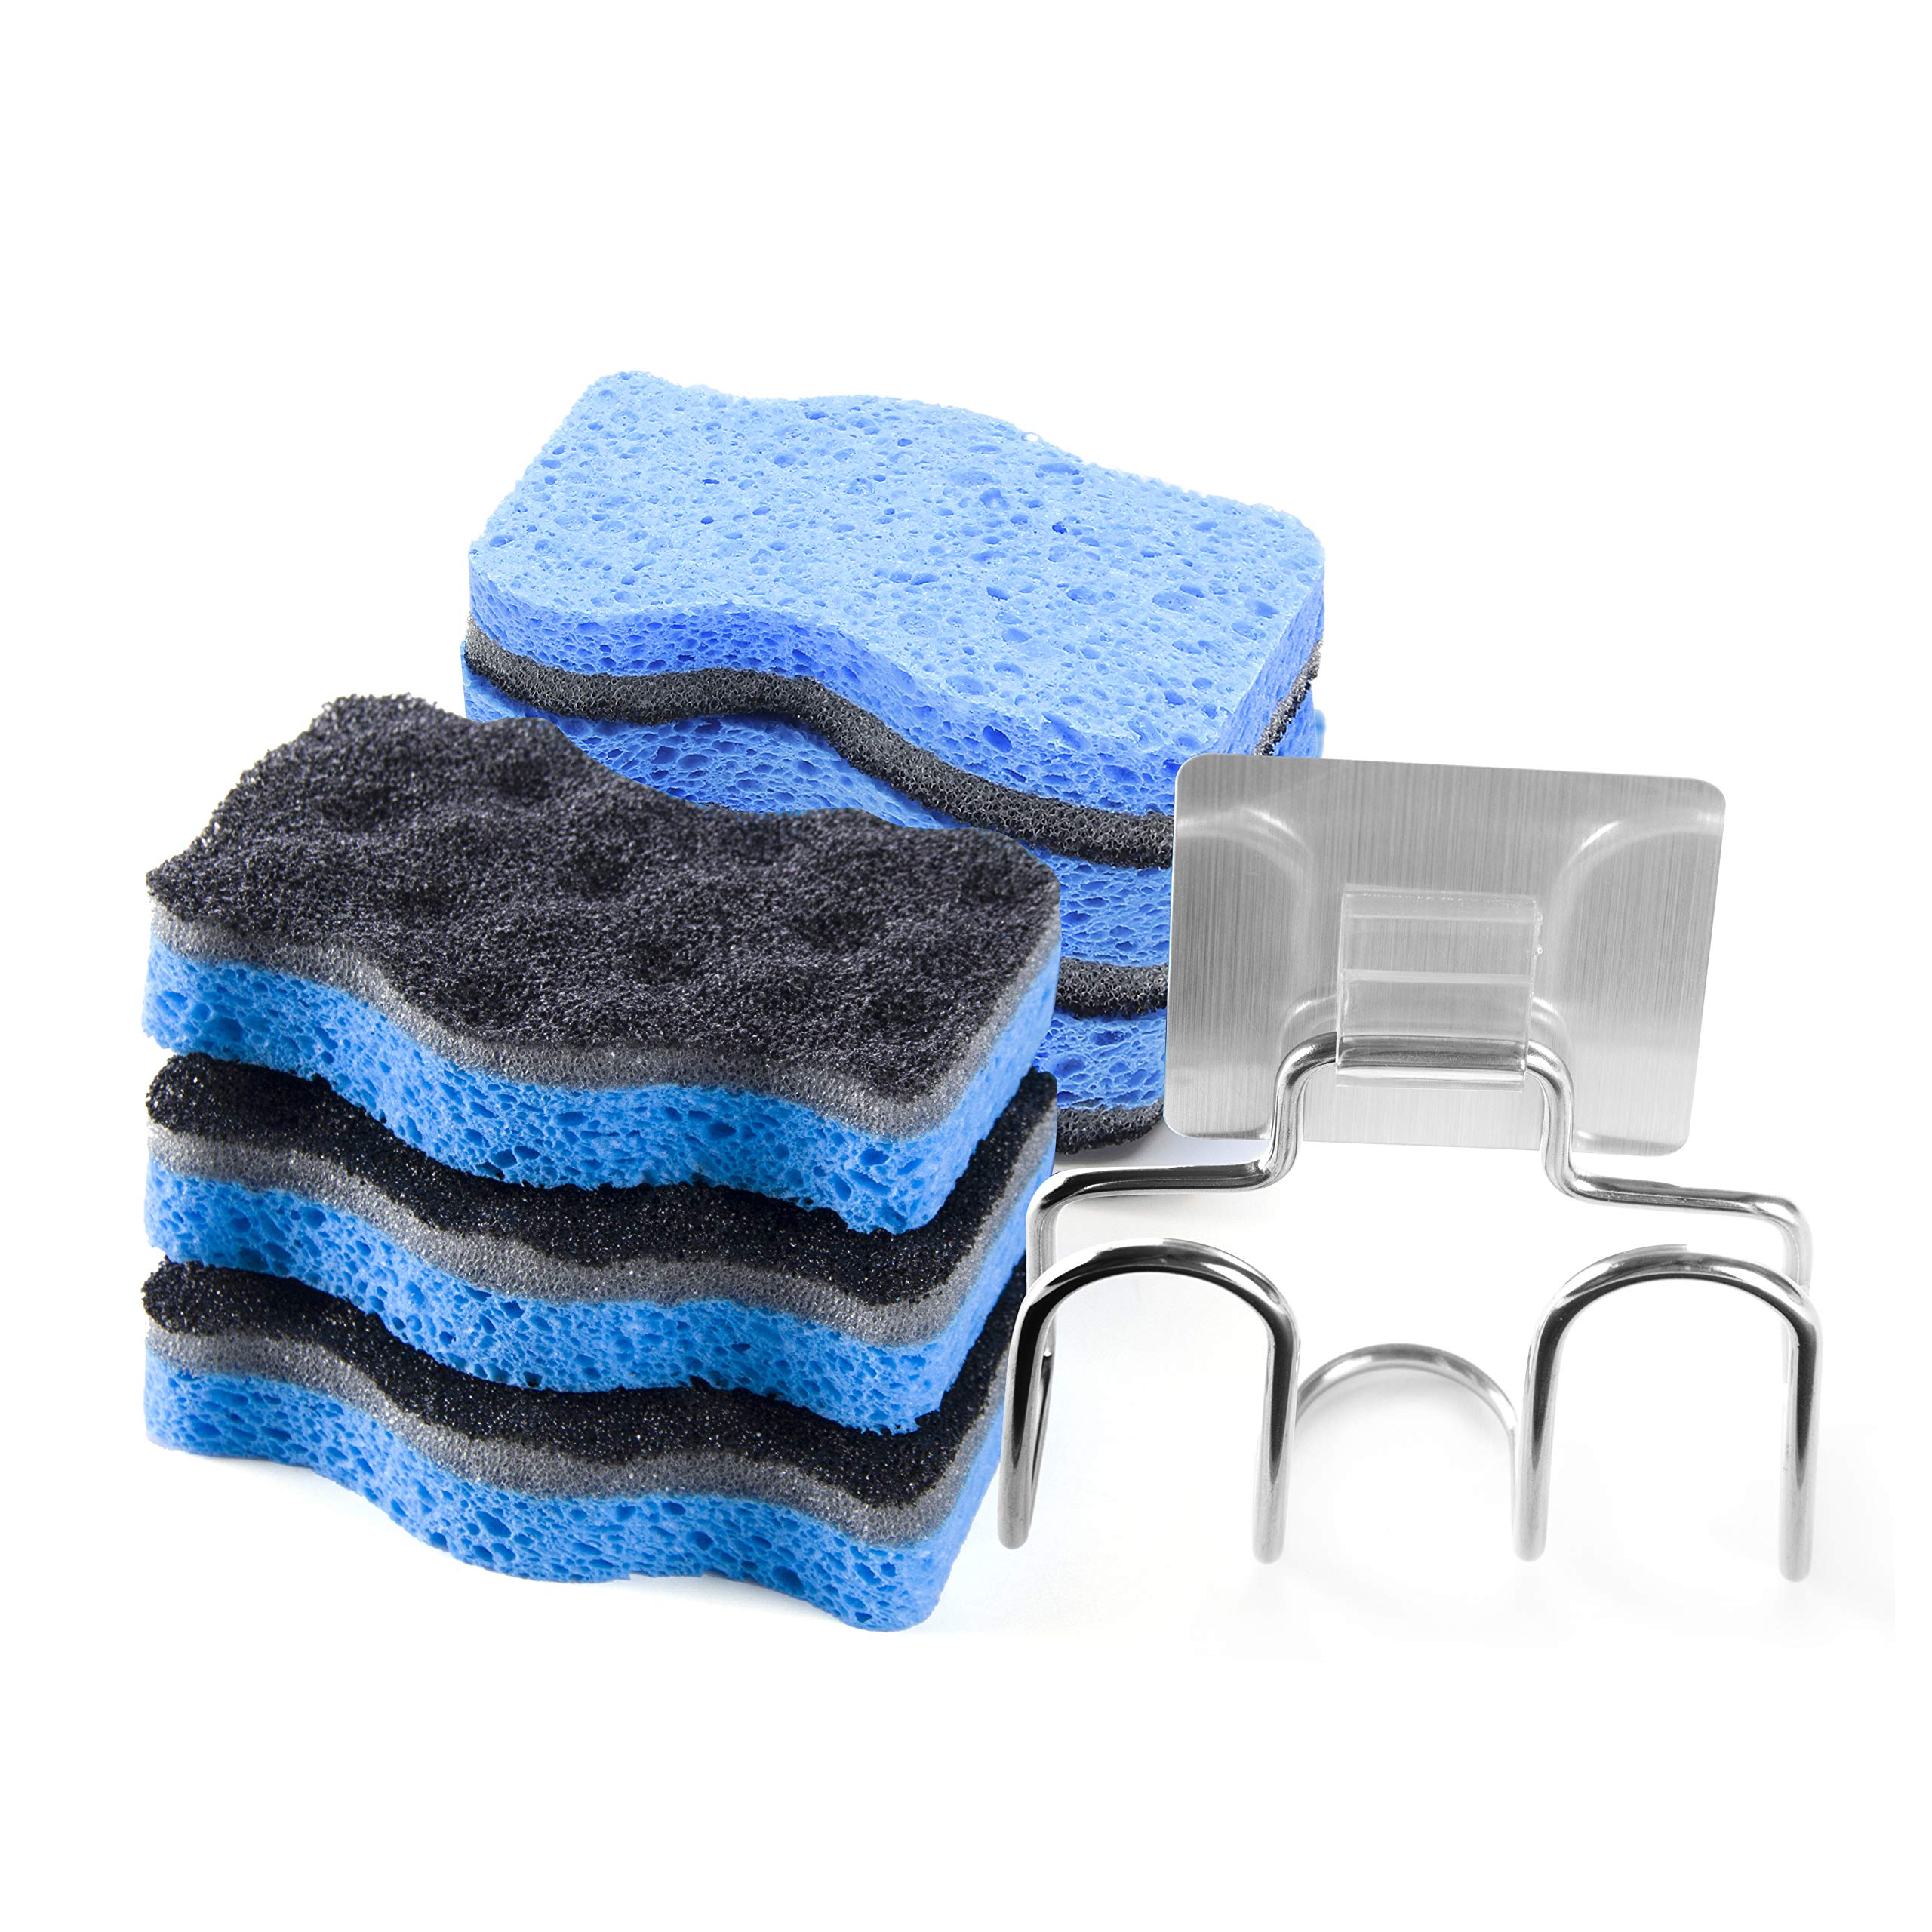 Book Cover SSJL Multi-Use Sponges Kitchen with Adhesive Stainless Steel Holder - Natural Kitchen Sponges Dish Sponge Dual-Sided Cellulose Scrubber - Effortless Cleaning Eco Scrub Pads for Dishes (6 Pack)